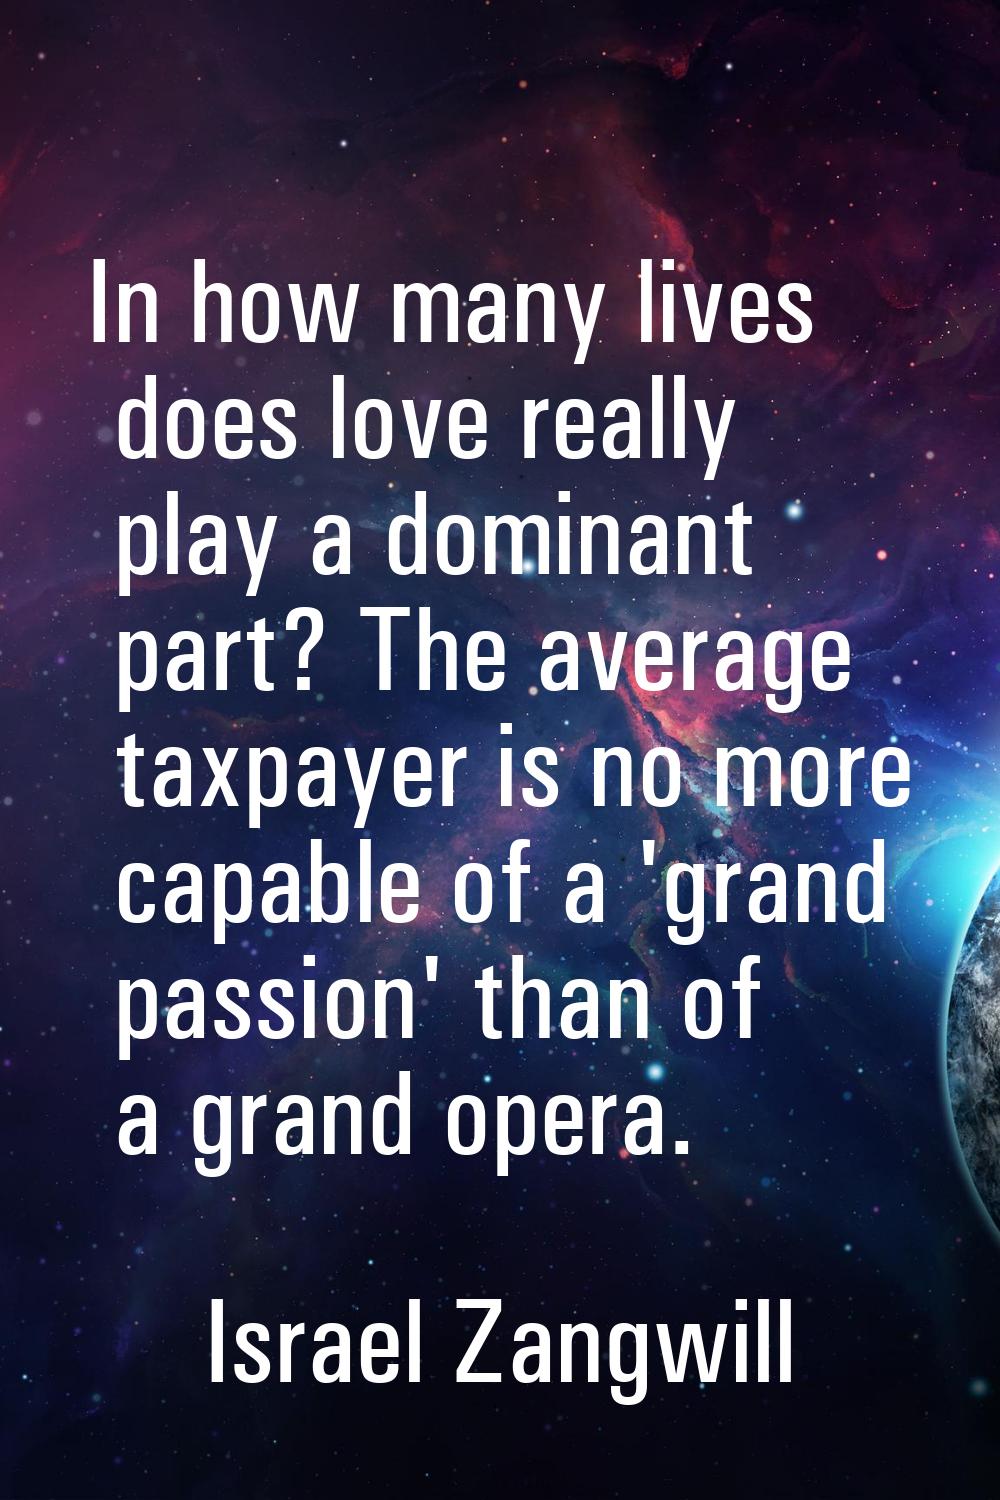 In how many lives does love really play a dominant part? The average taxpayer is no more capable of